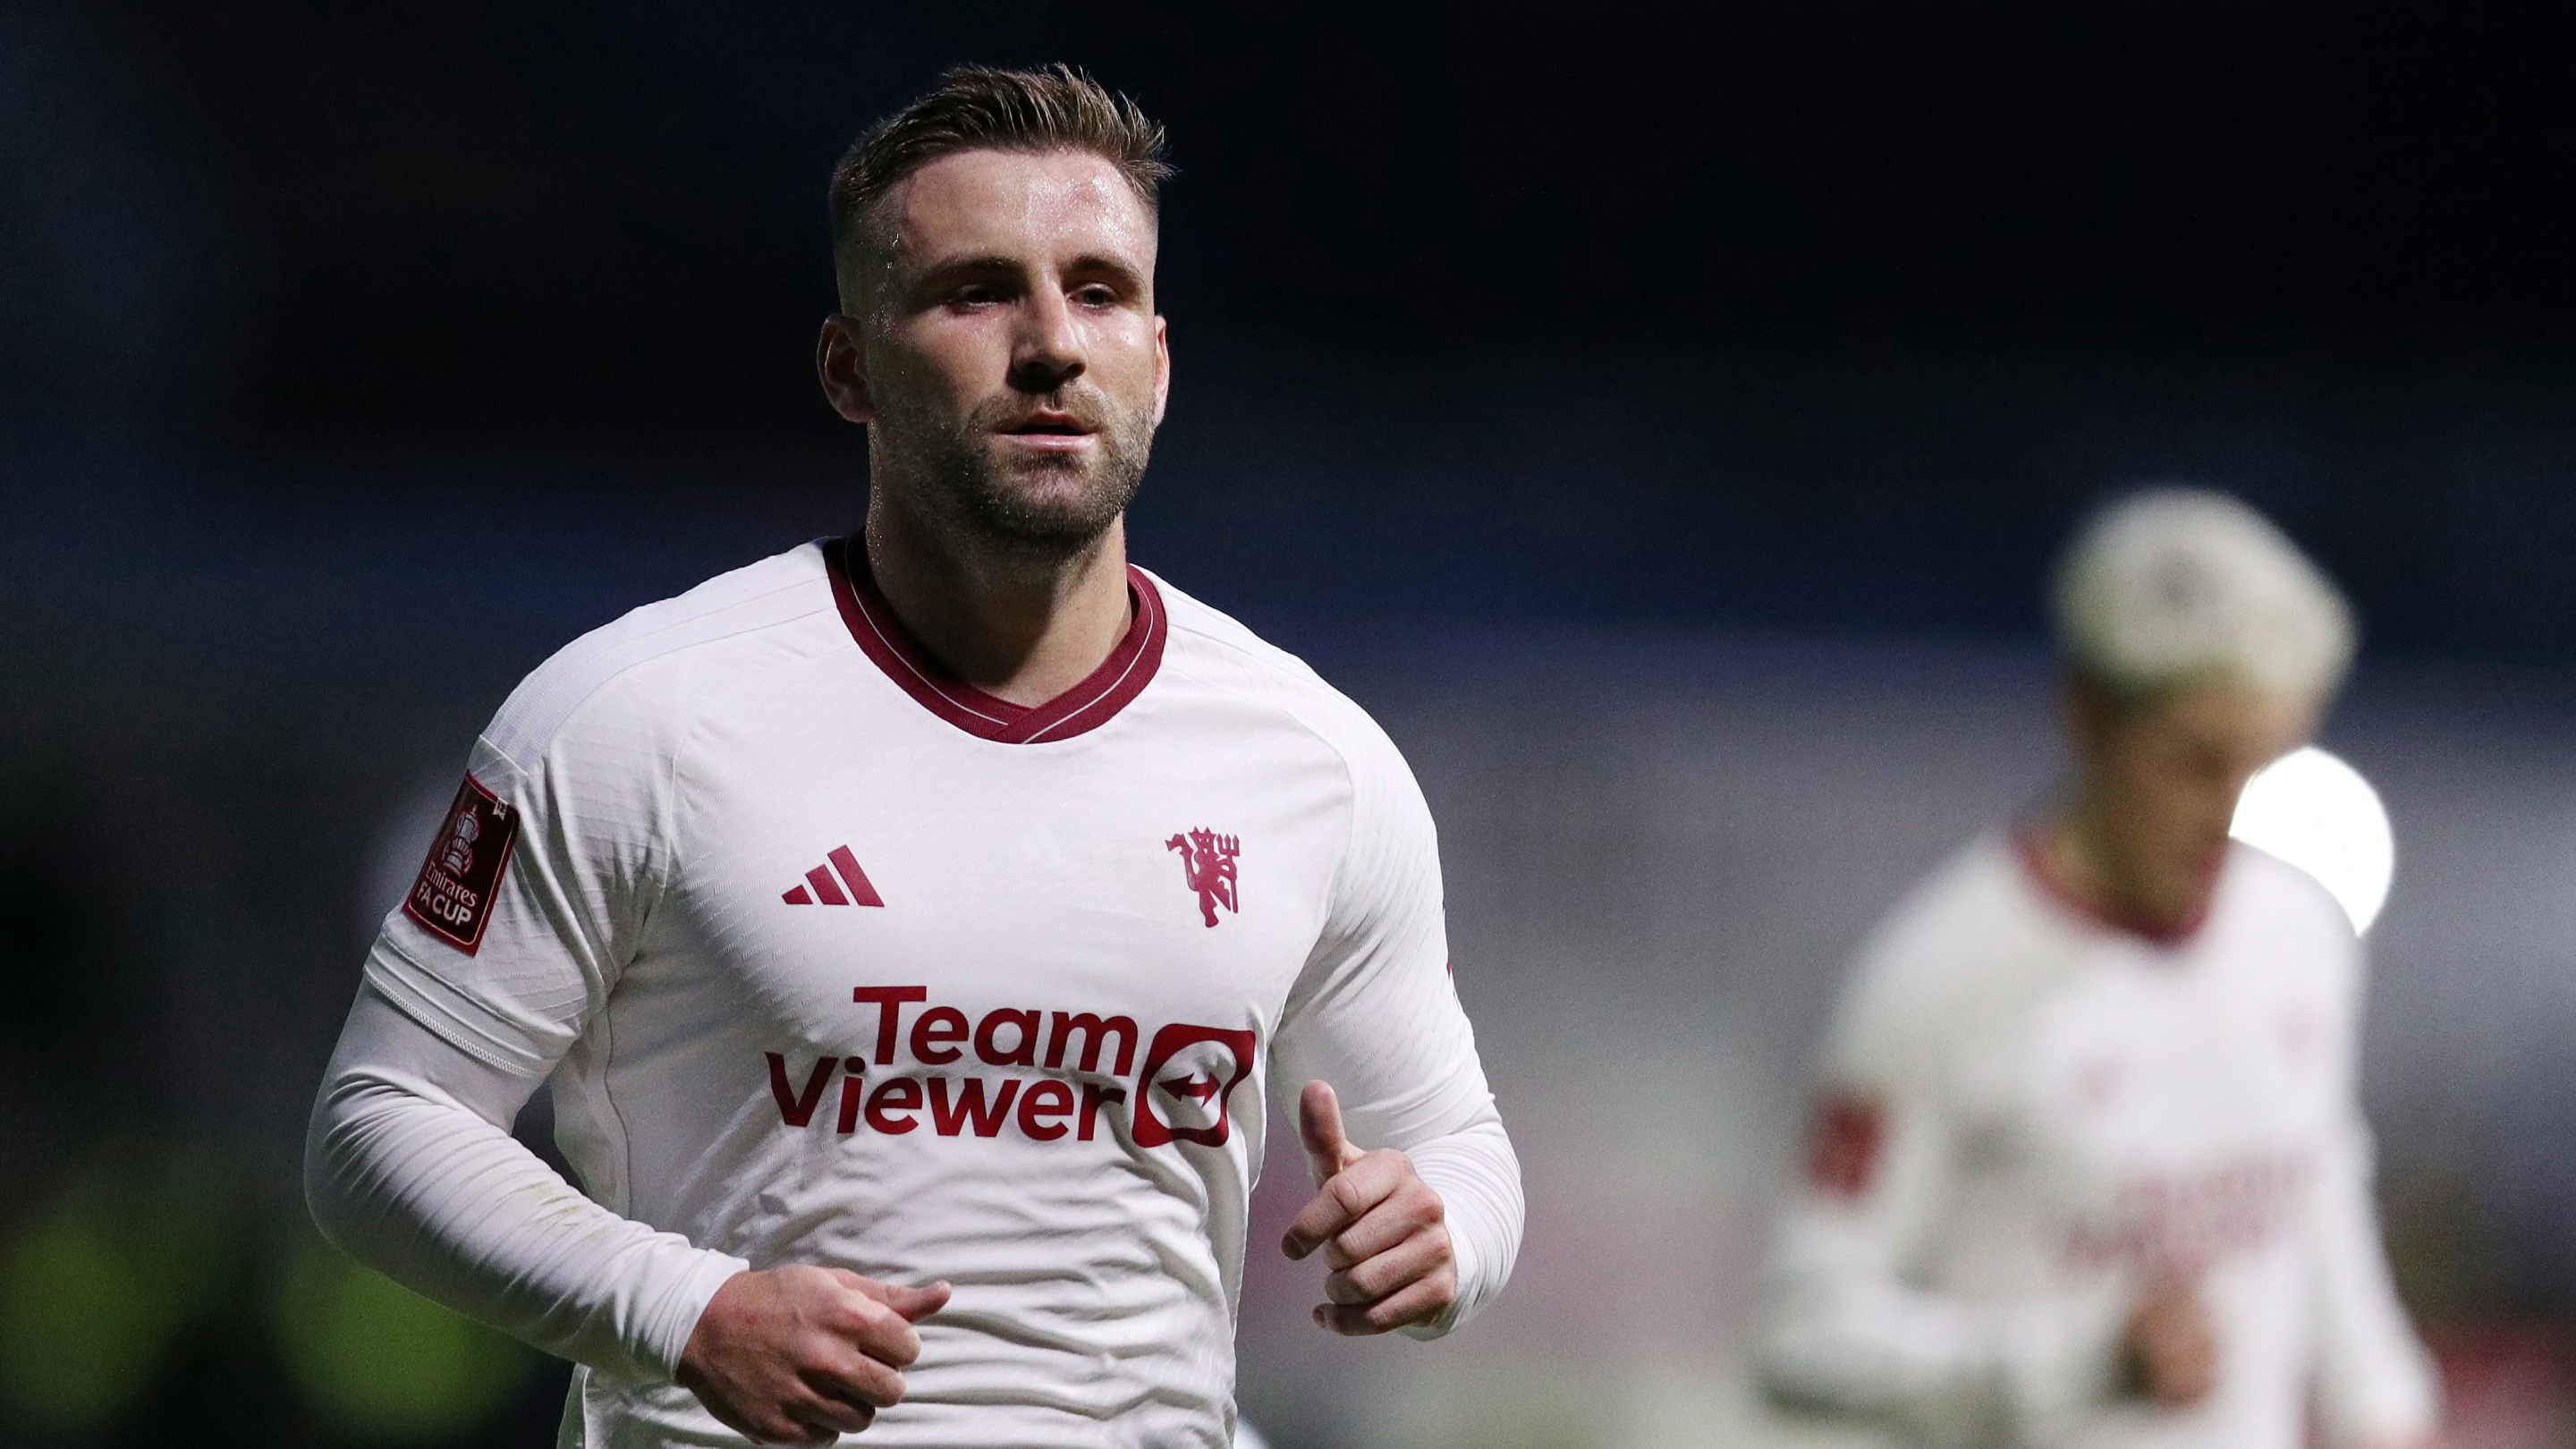 Luke Shaw reveals who is to blame for Man Utd and England injury struggles